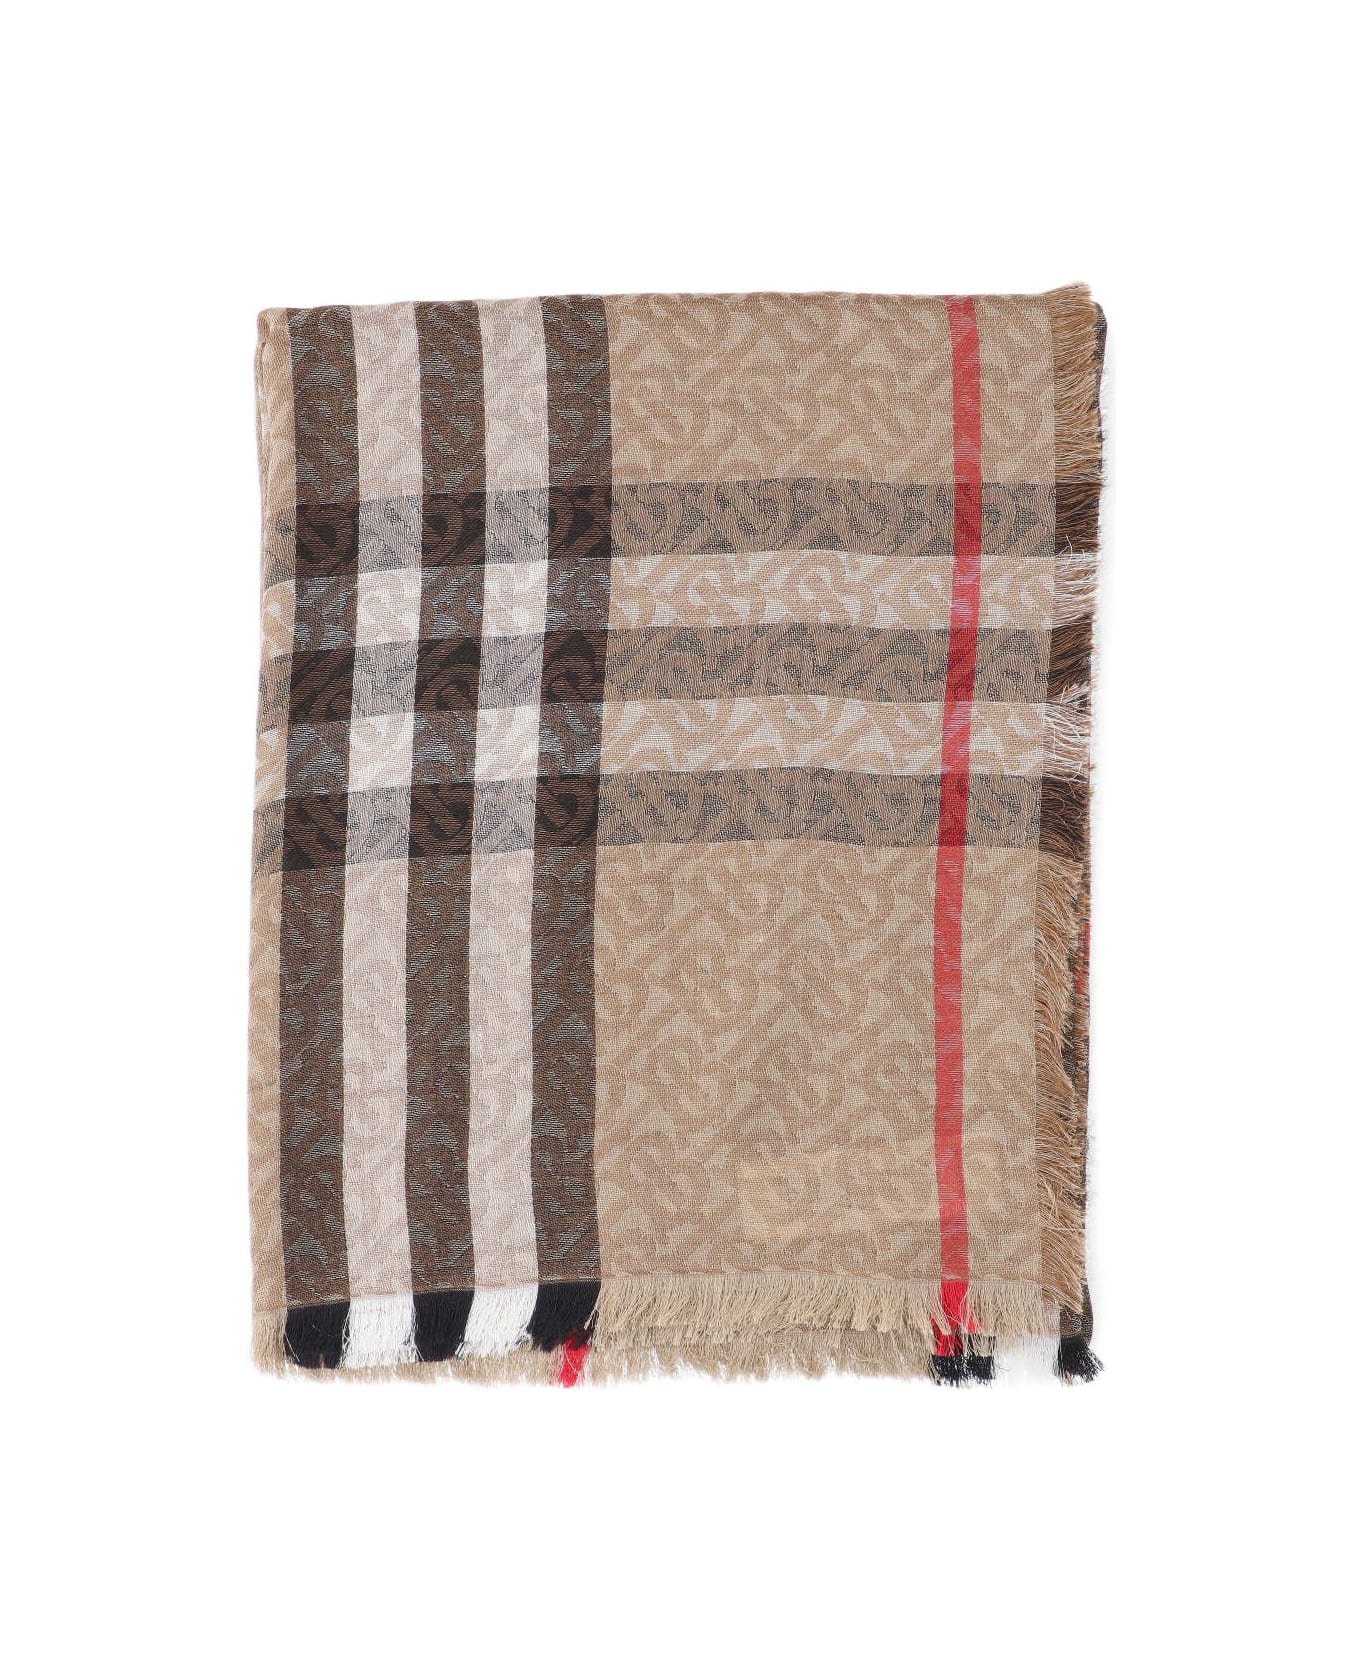 Burberry Embroidered Wool Blend Scarf - Beige